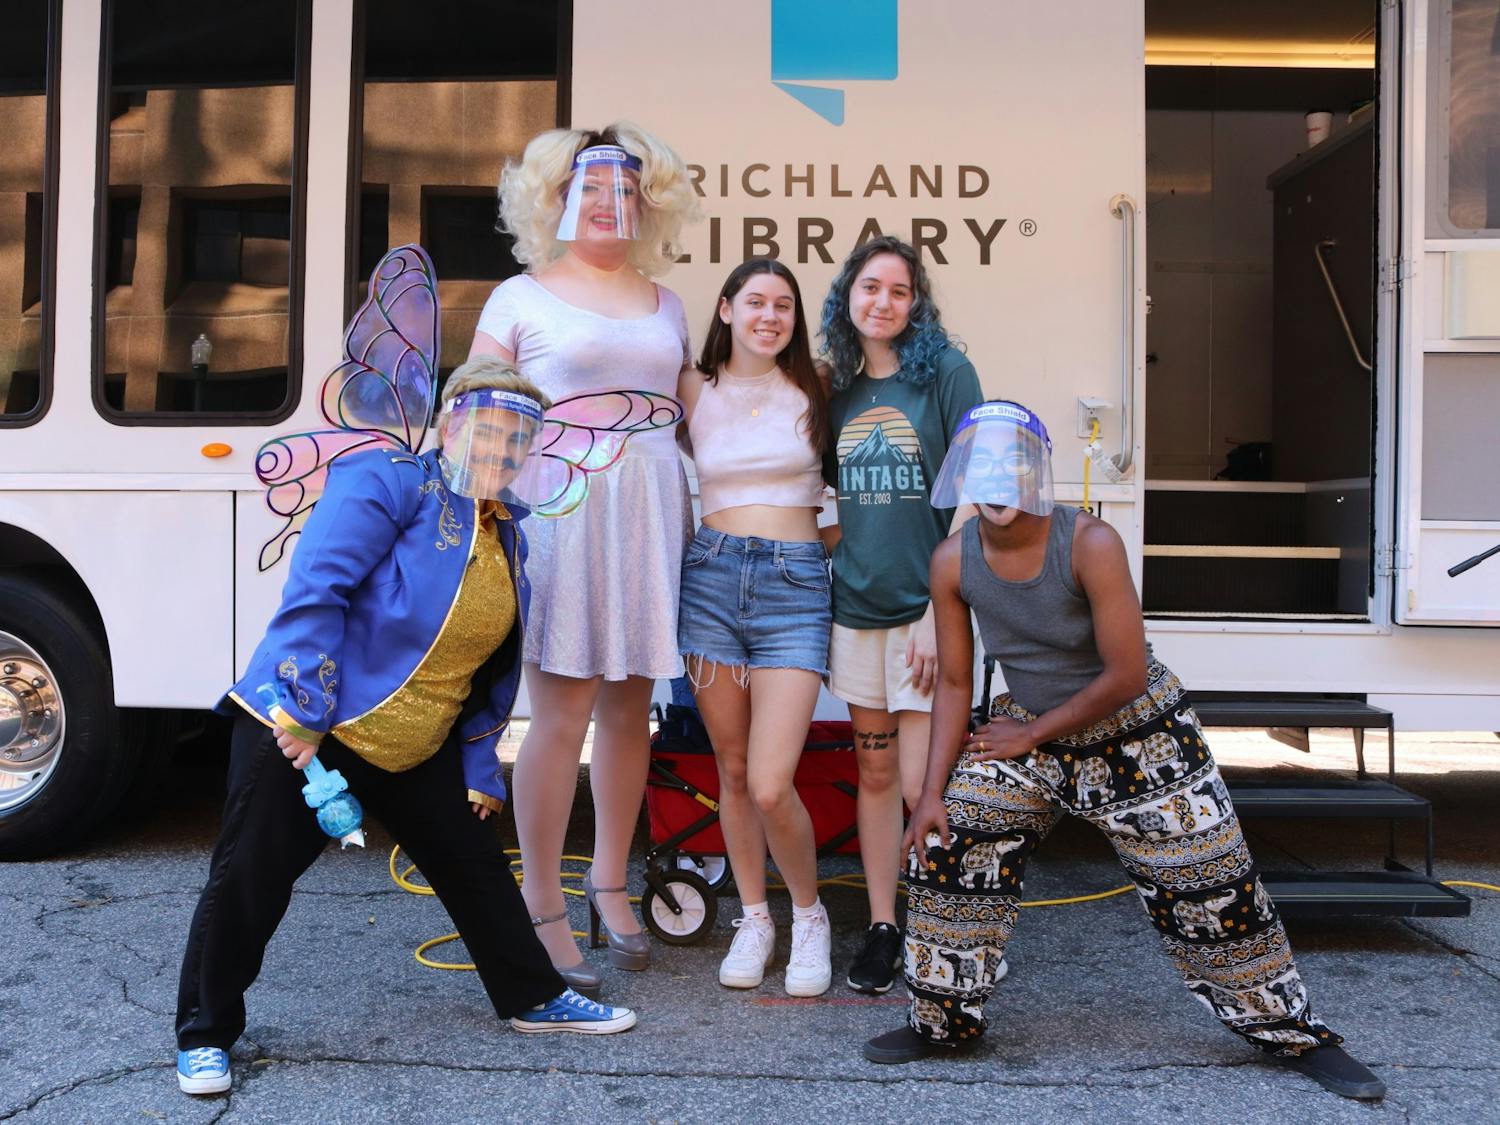 Drag queen Onya Nerves, drag kings Dandy and Marty McGuy, and USC freshmen Alexa Poupis and Sarah Sham pose for a photo after D.R.A.G. Storytime at the 2021 South Carolina Pride Festival, an event dedicated to celebrating the LGBTQIA+ community and advocating for LGBQIA+ equality.